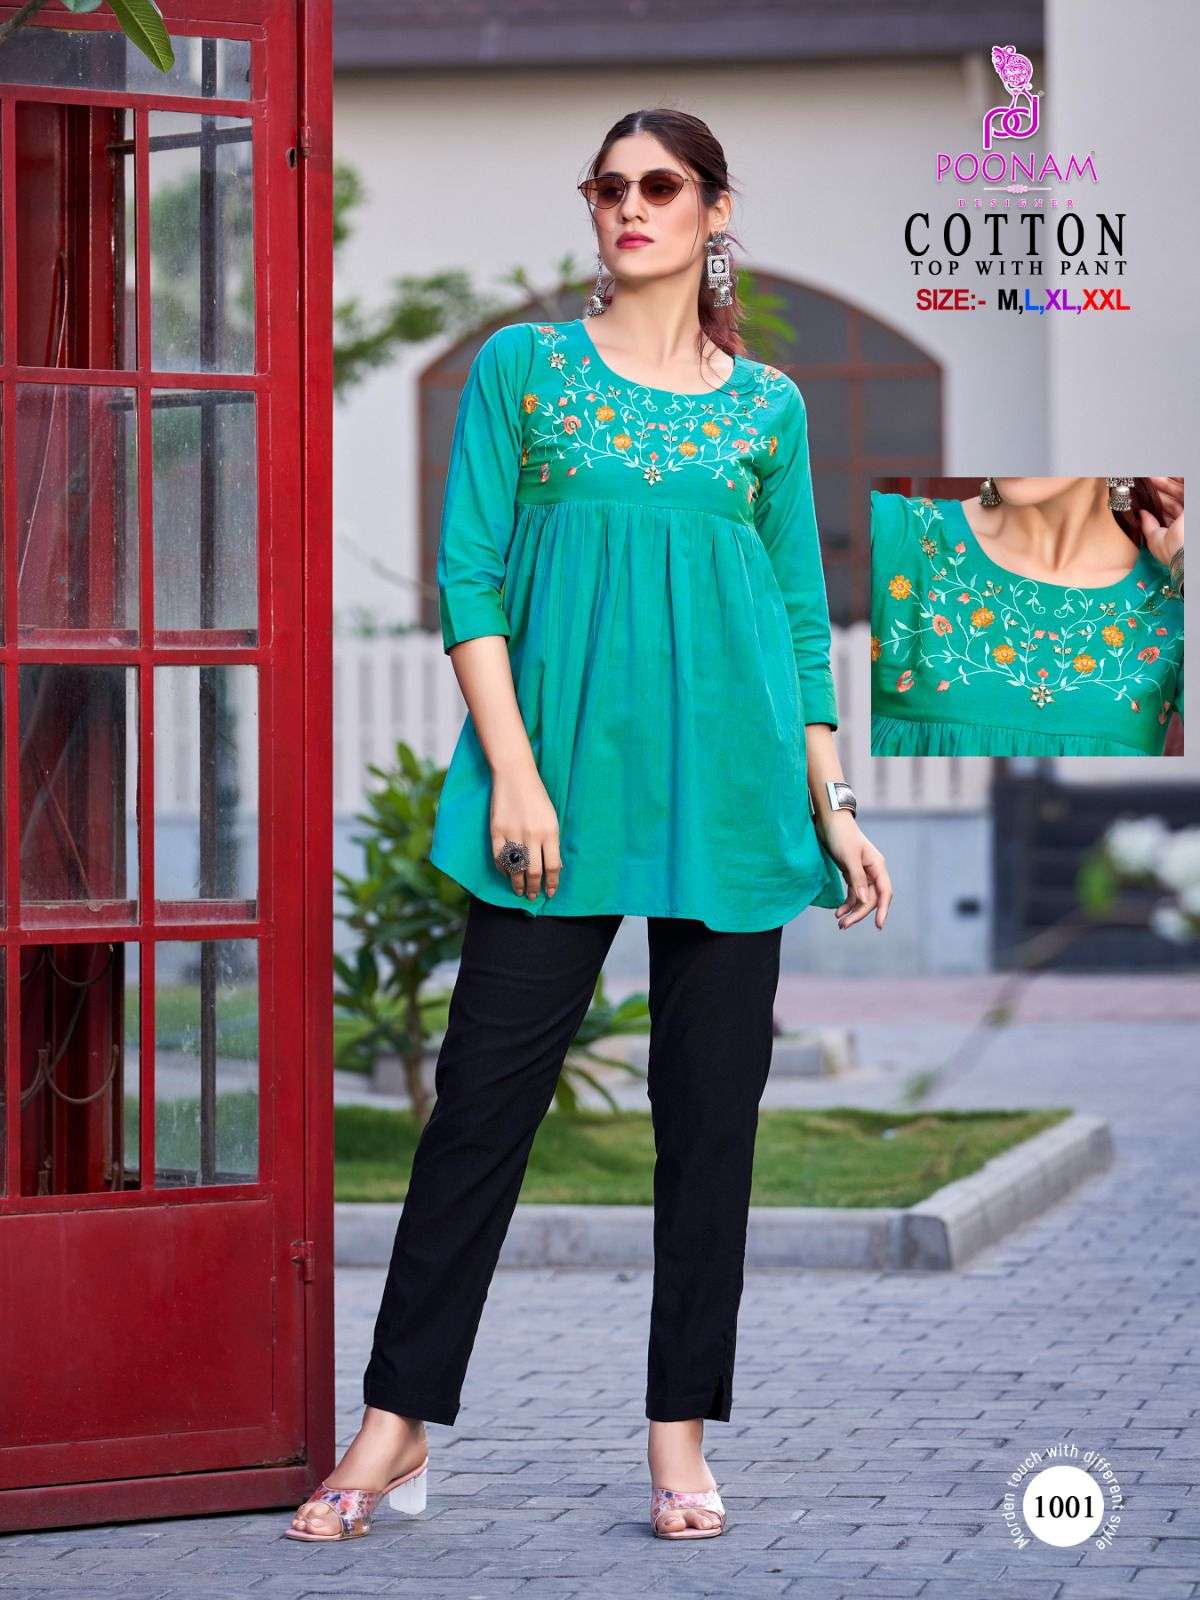 poonam designer cotton 1001-1006 summer special tunic tops with pant 